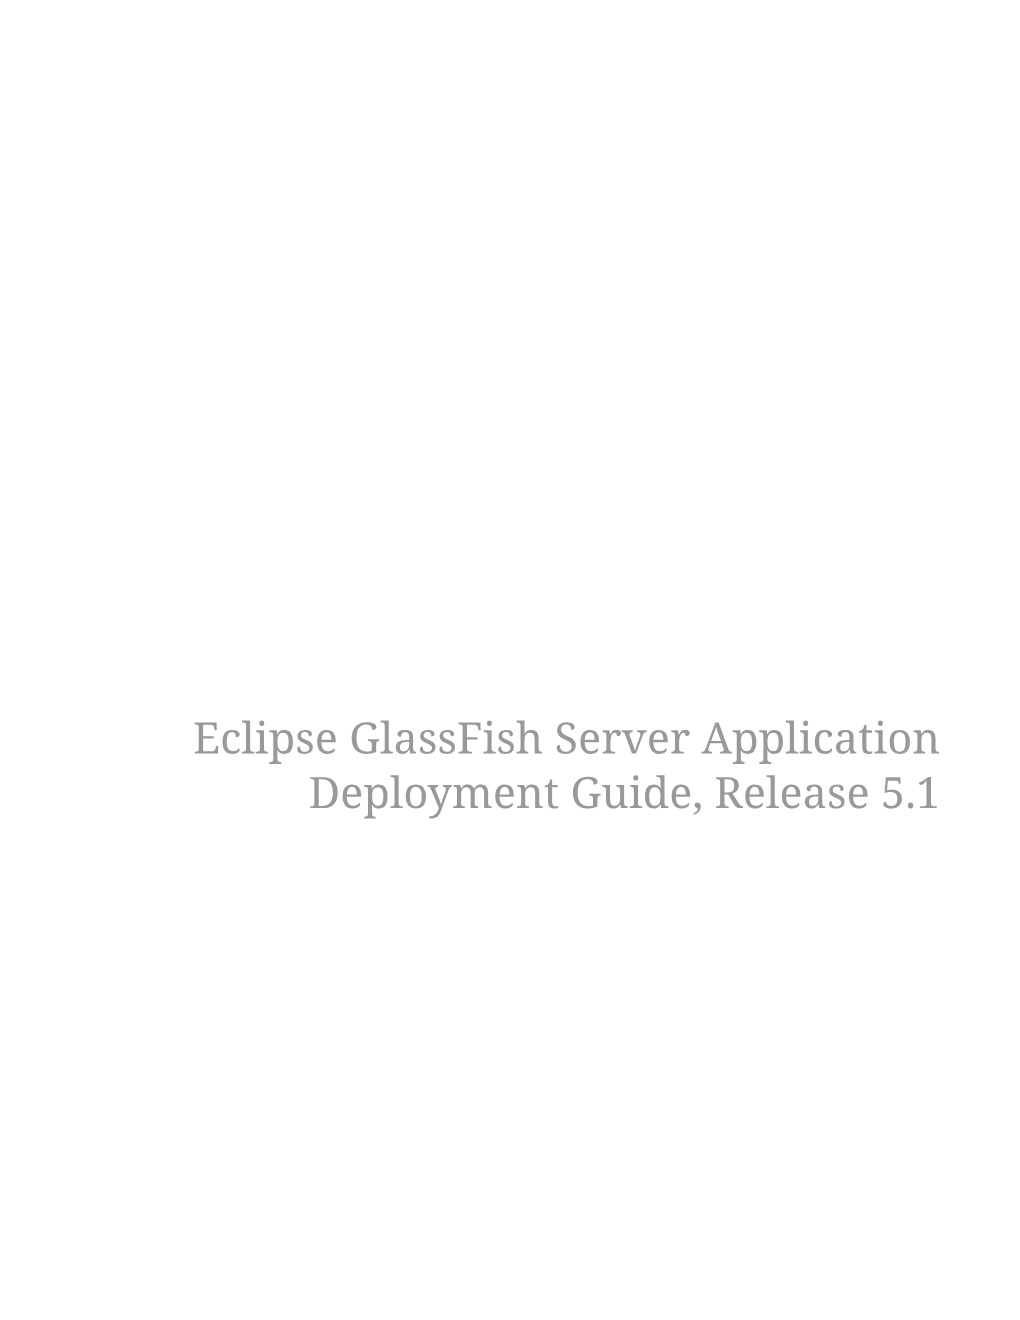 Eclipse Glassfish Server Application Deployment Guide, Release 5.1 Table of Contents